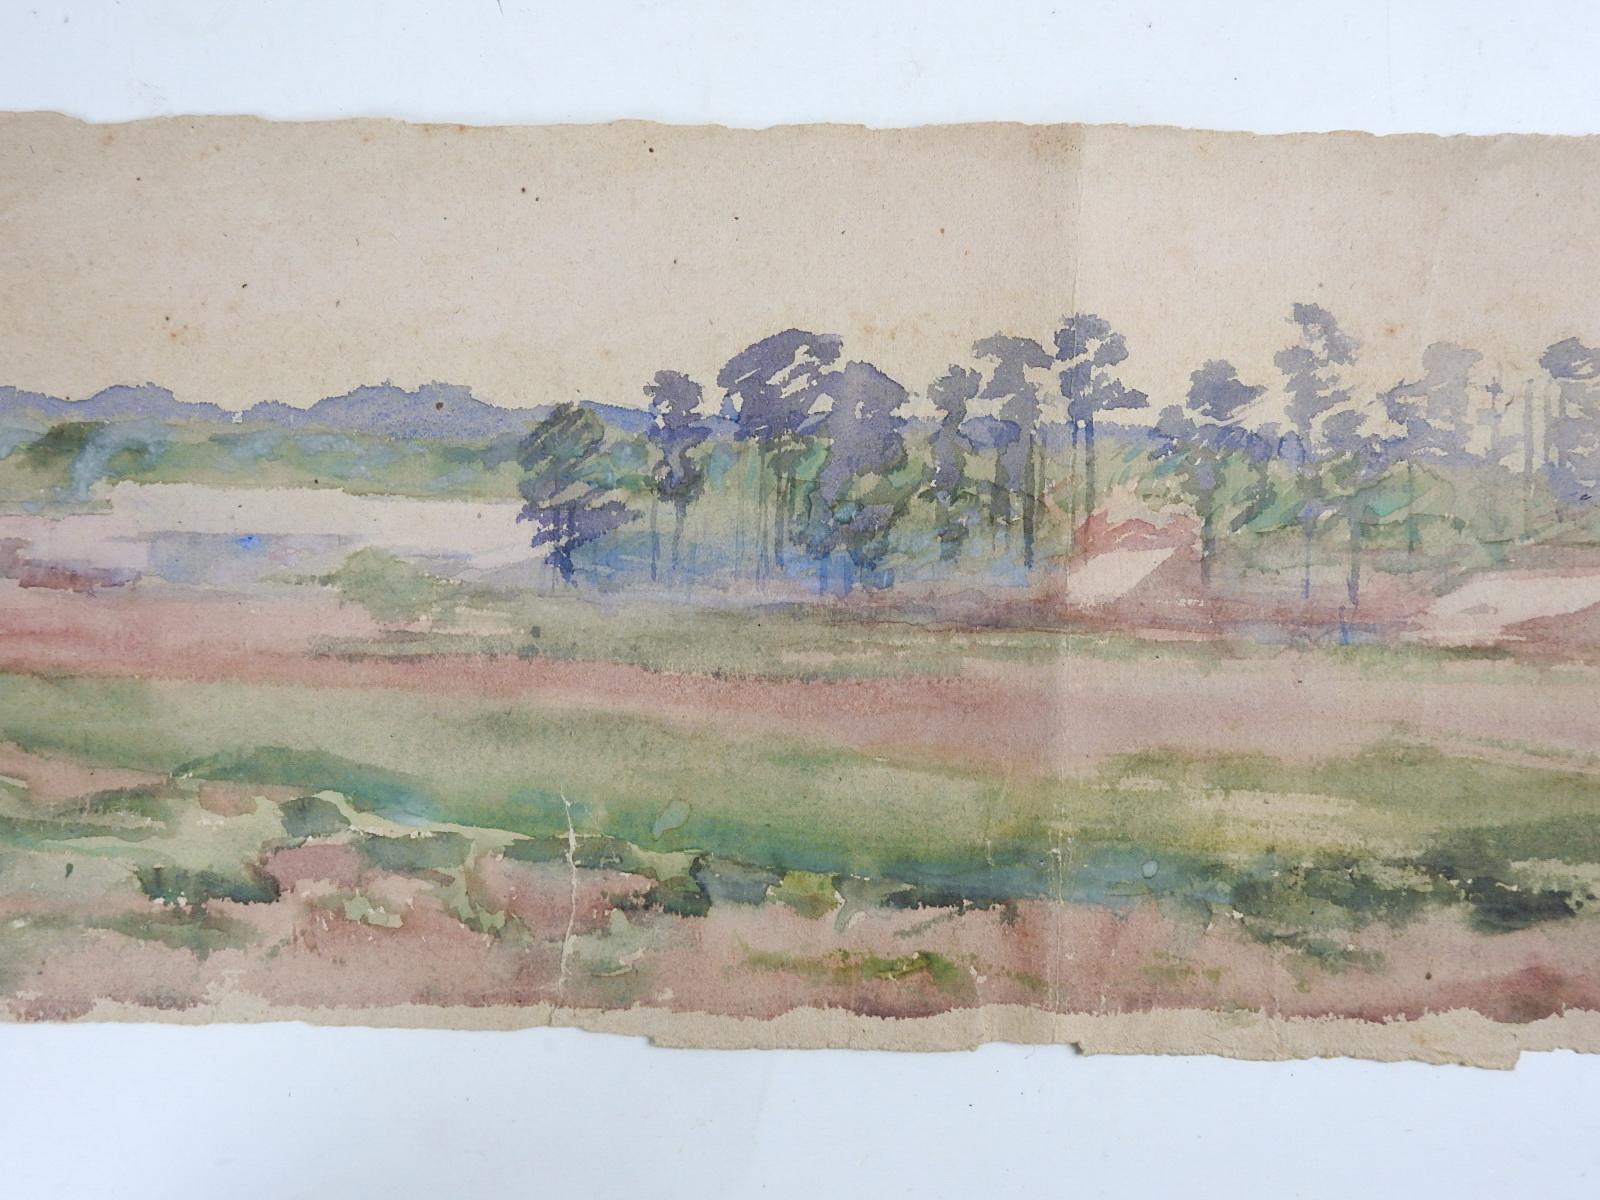 American Antique Distressed Long Format Landscape Watercolor Painting For Sale